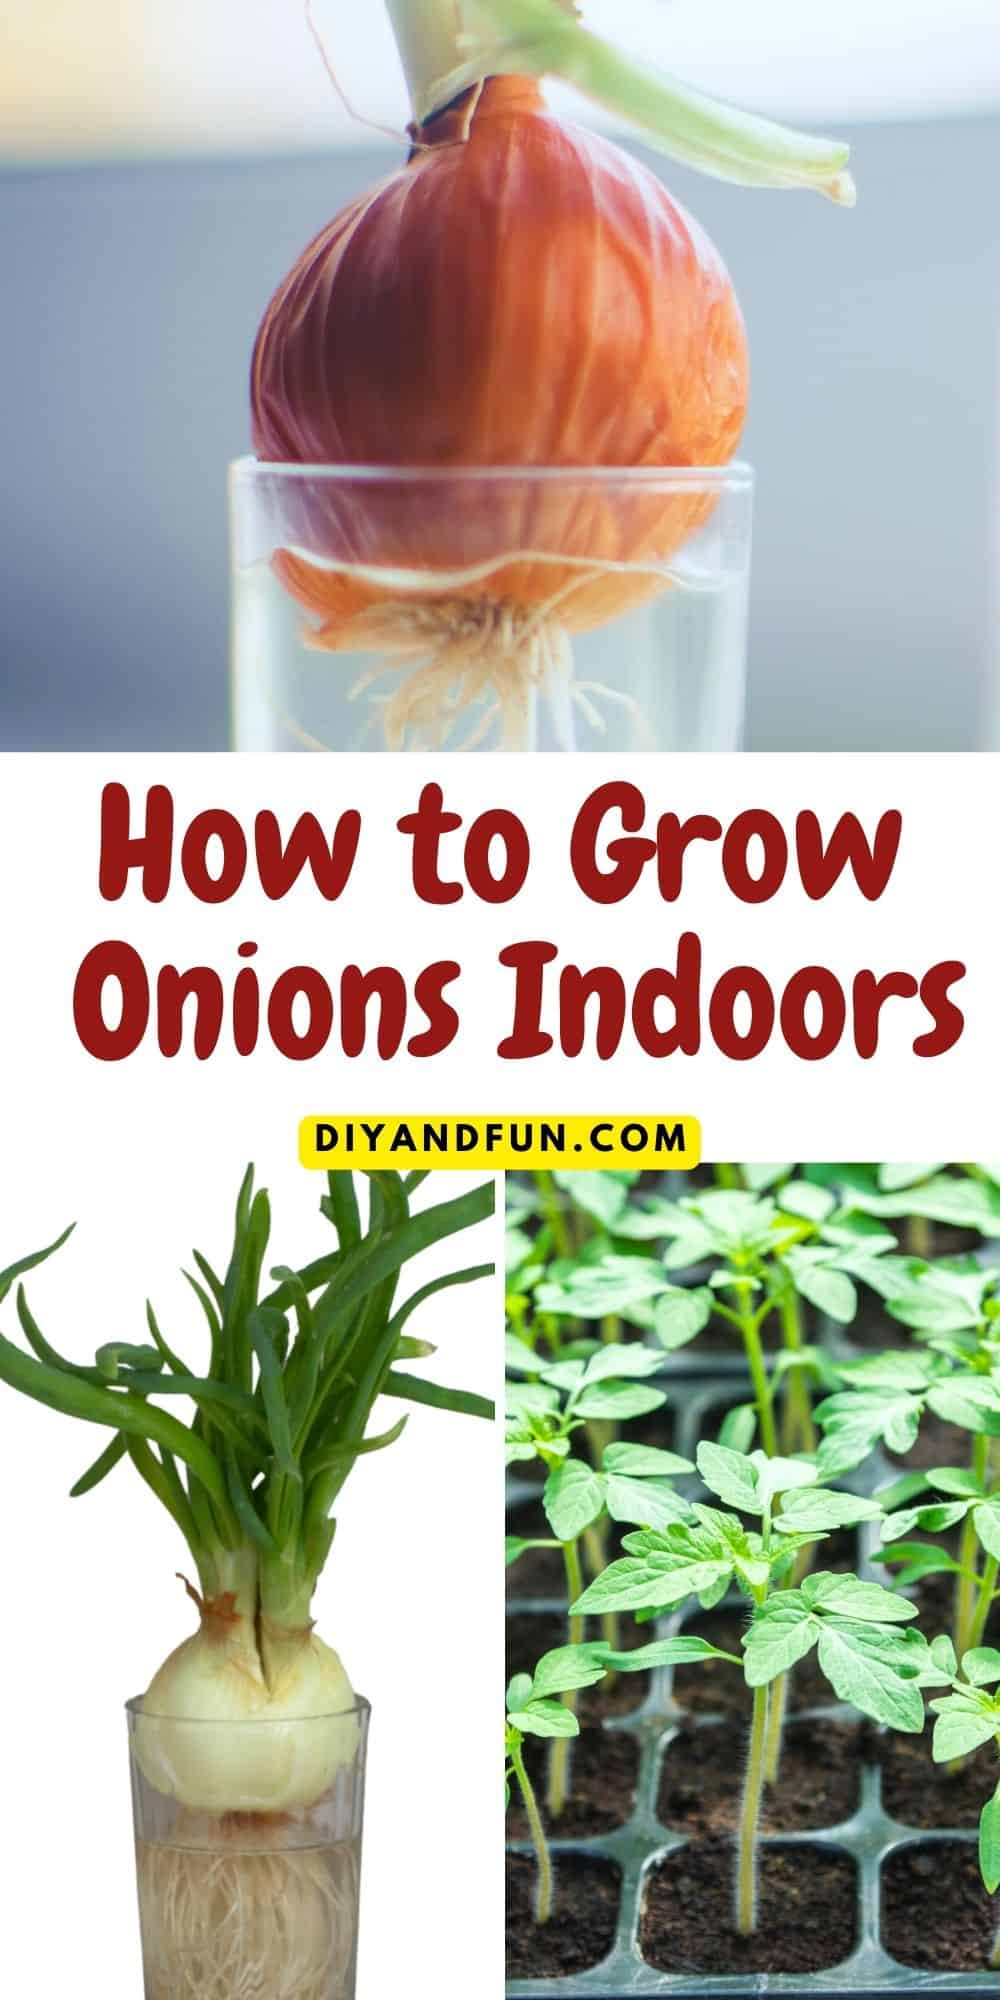 How to Grow Onions Indoors, a simple guide for growing your own onions from onions or from seeds. Included soil and water methods.